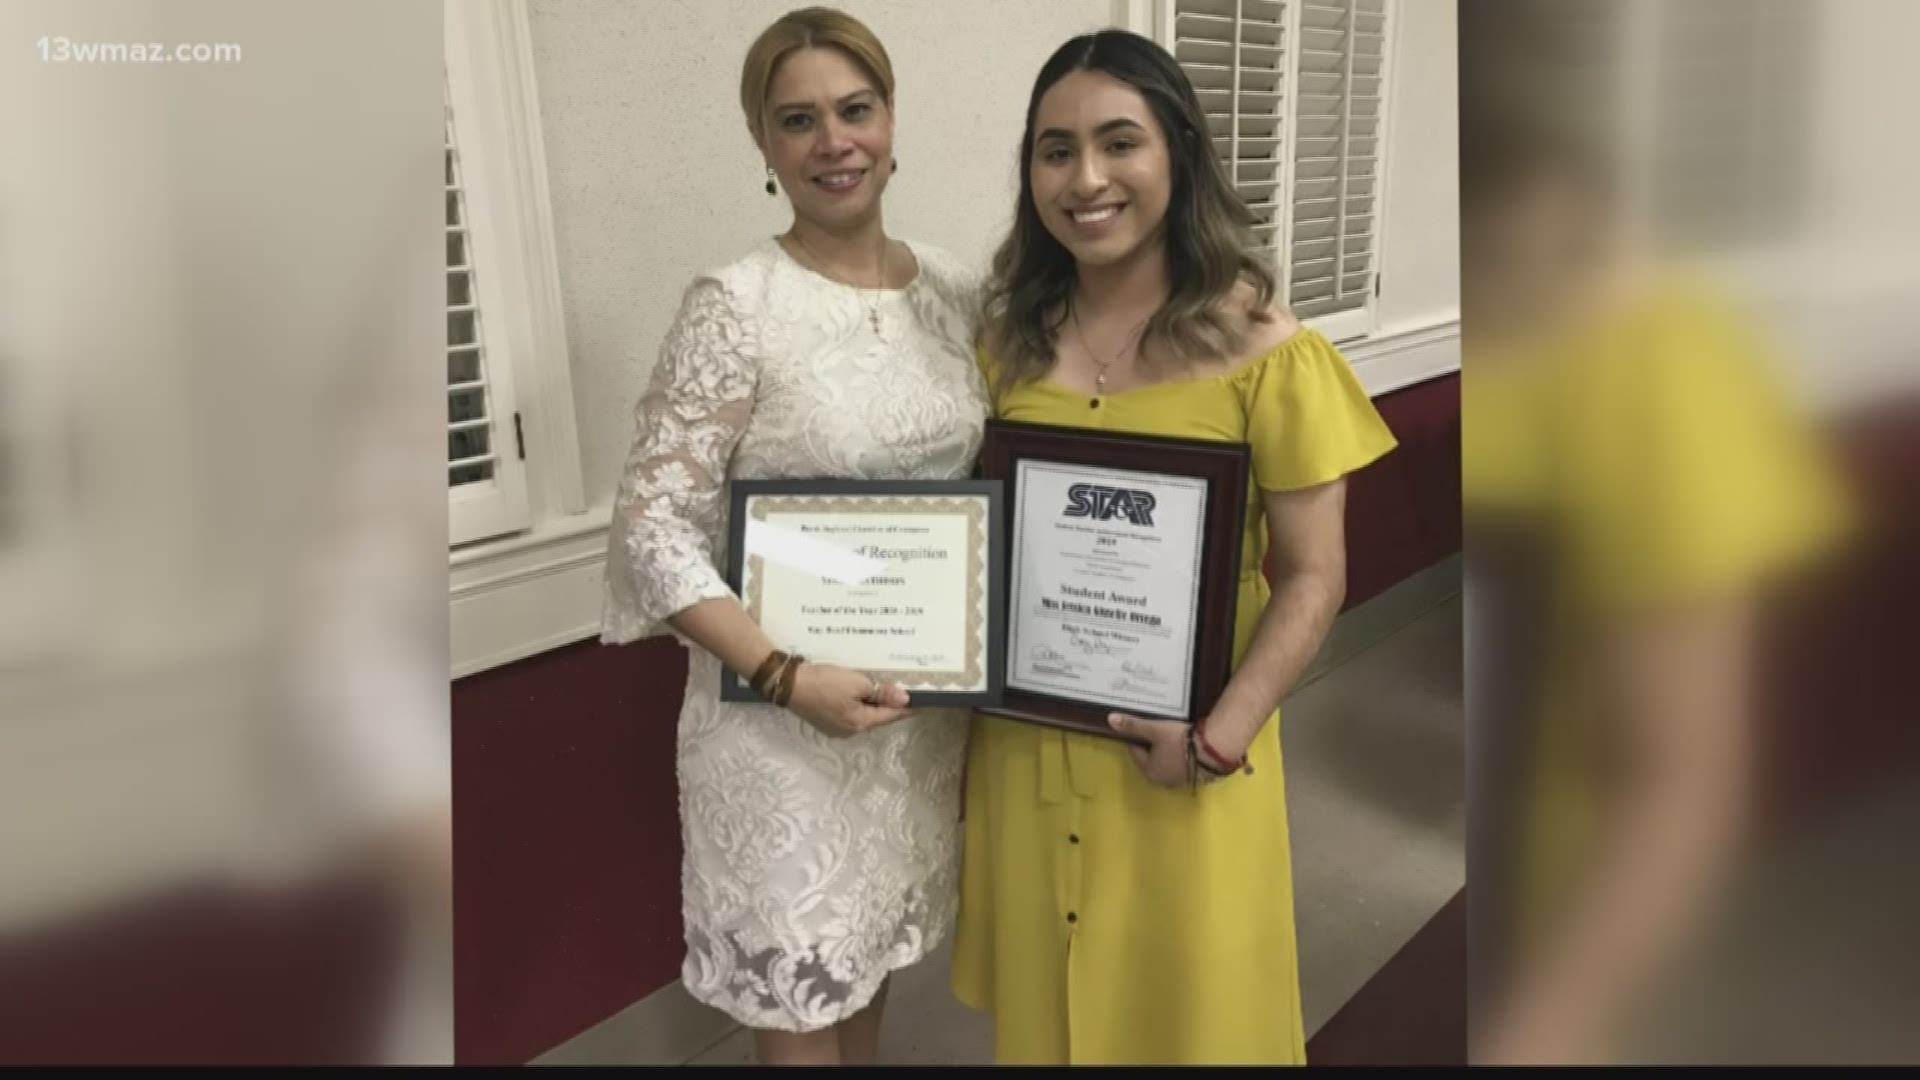 Peach County's 2019 Star Student began her academic journey with English as her second language. Jessica Ortega says it's all thanks to her teacher who helped her along the way.